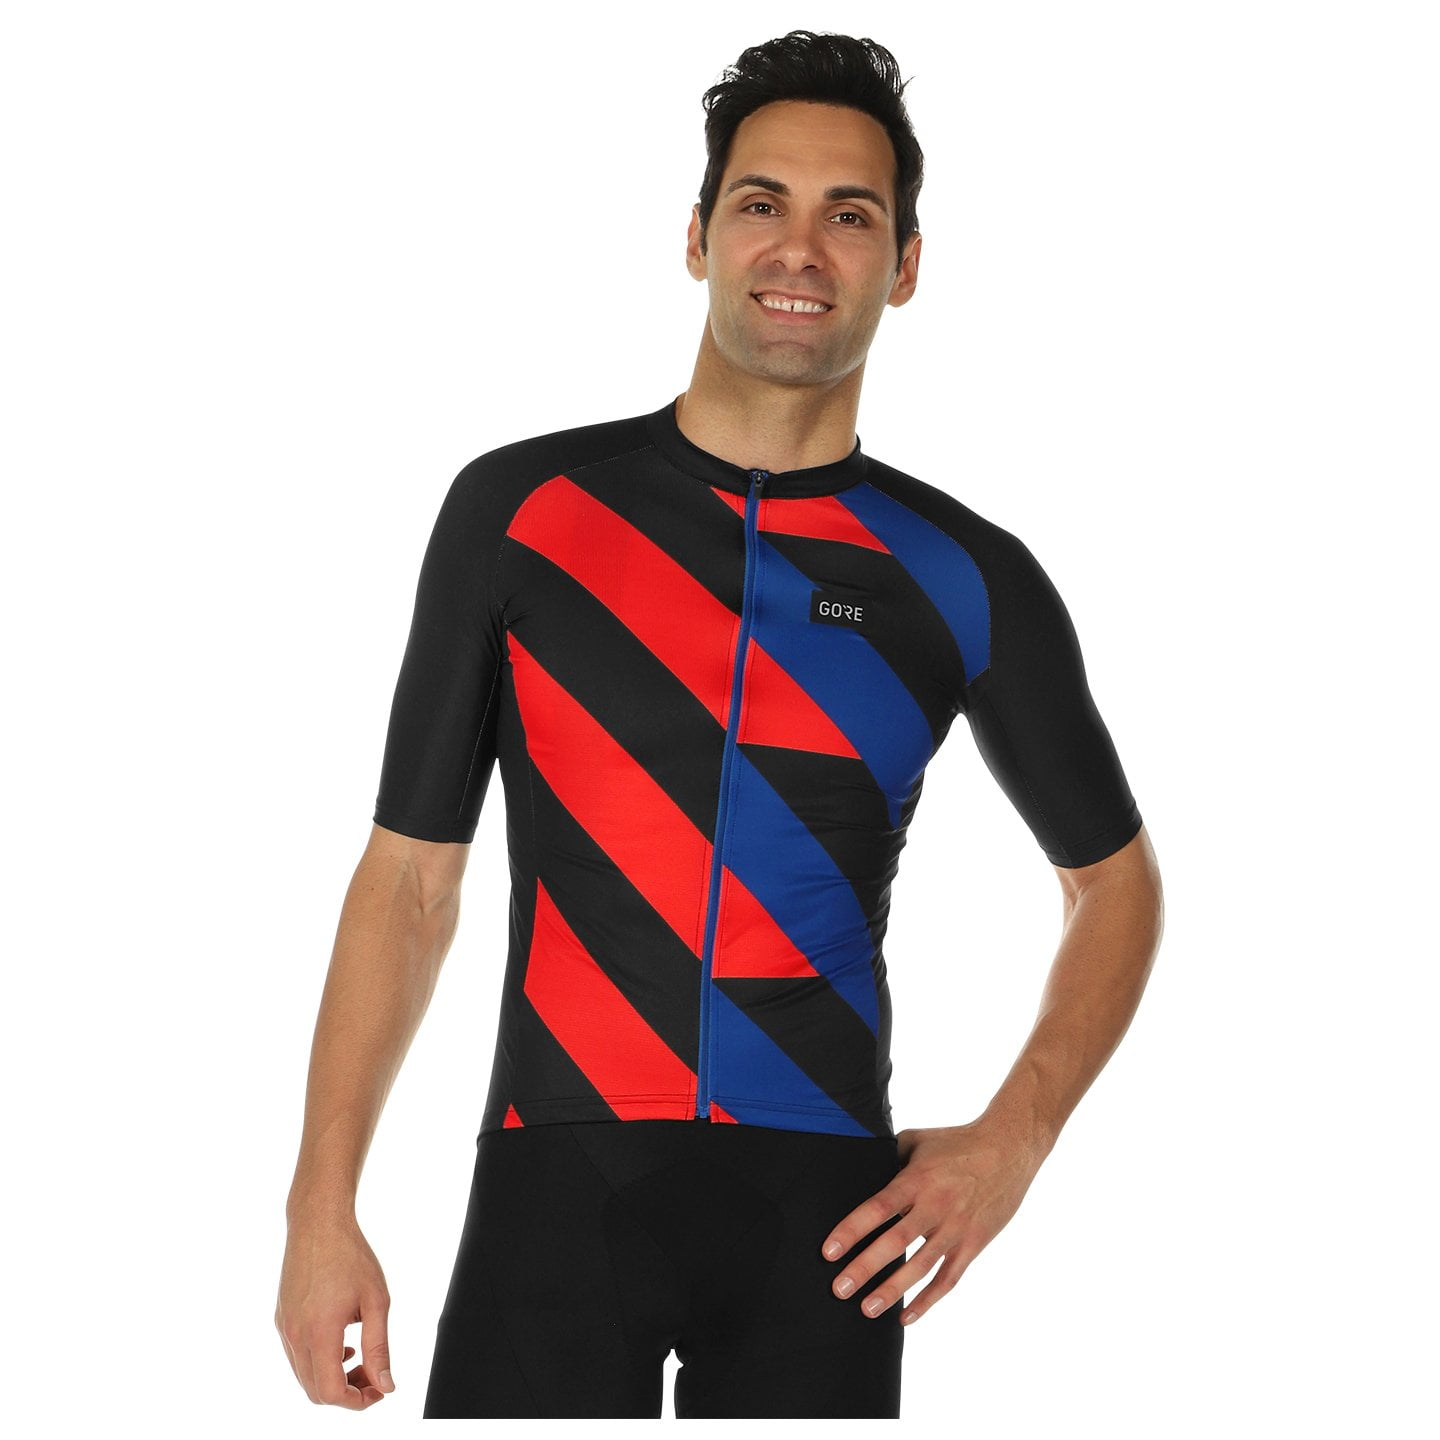 GORE WEAR Signal Short Sleeve Jersey Short Sleeve Jersey, for men, size XL, Cycling jersey, Cycle clothing